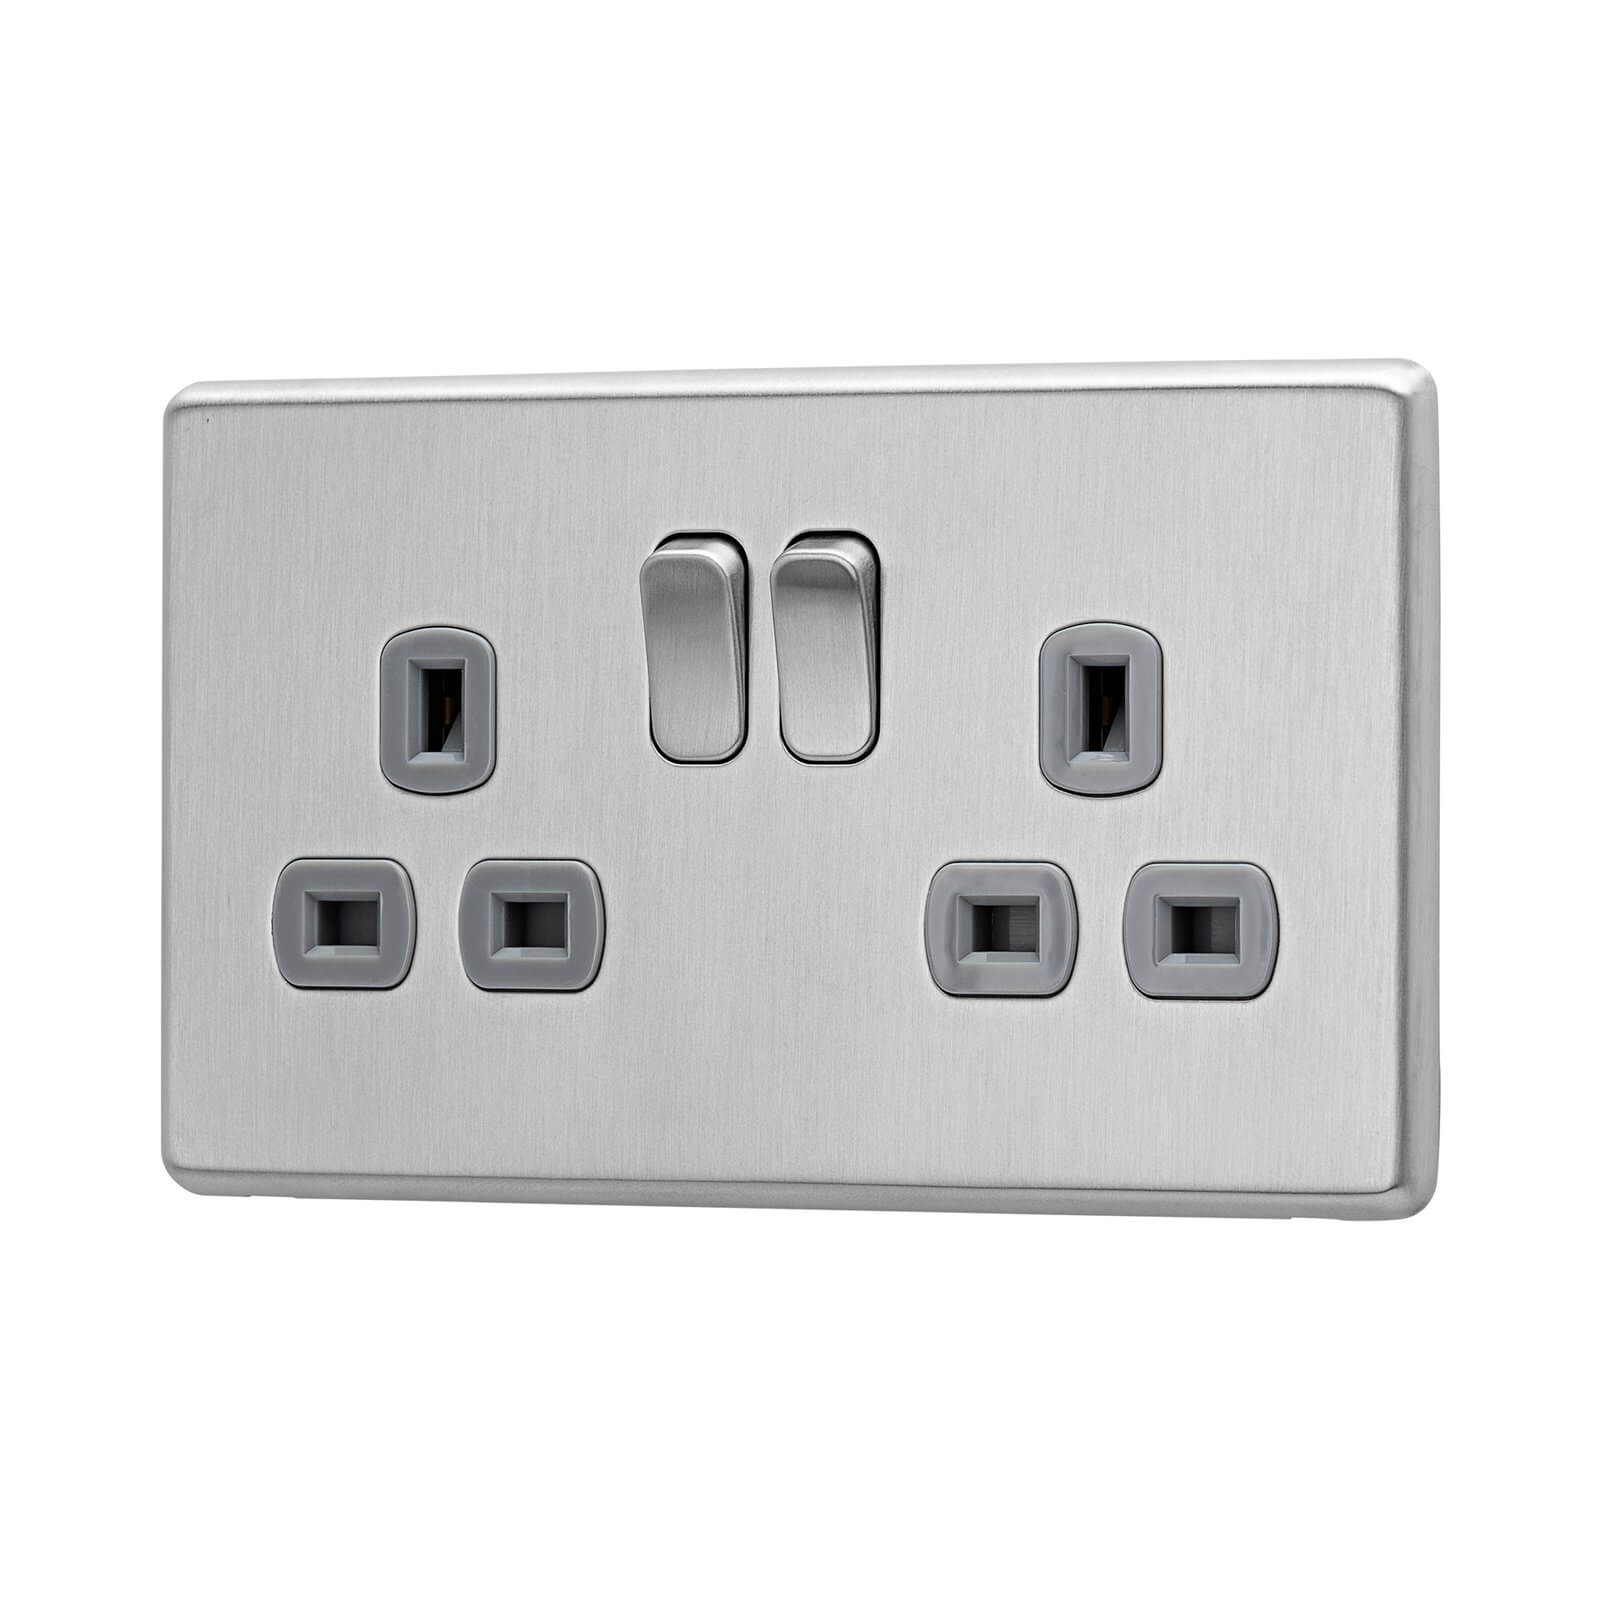 Photo of Arlec Fusion 13a 2 Gang Stainless Steel Double Switched Socket